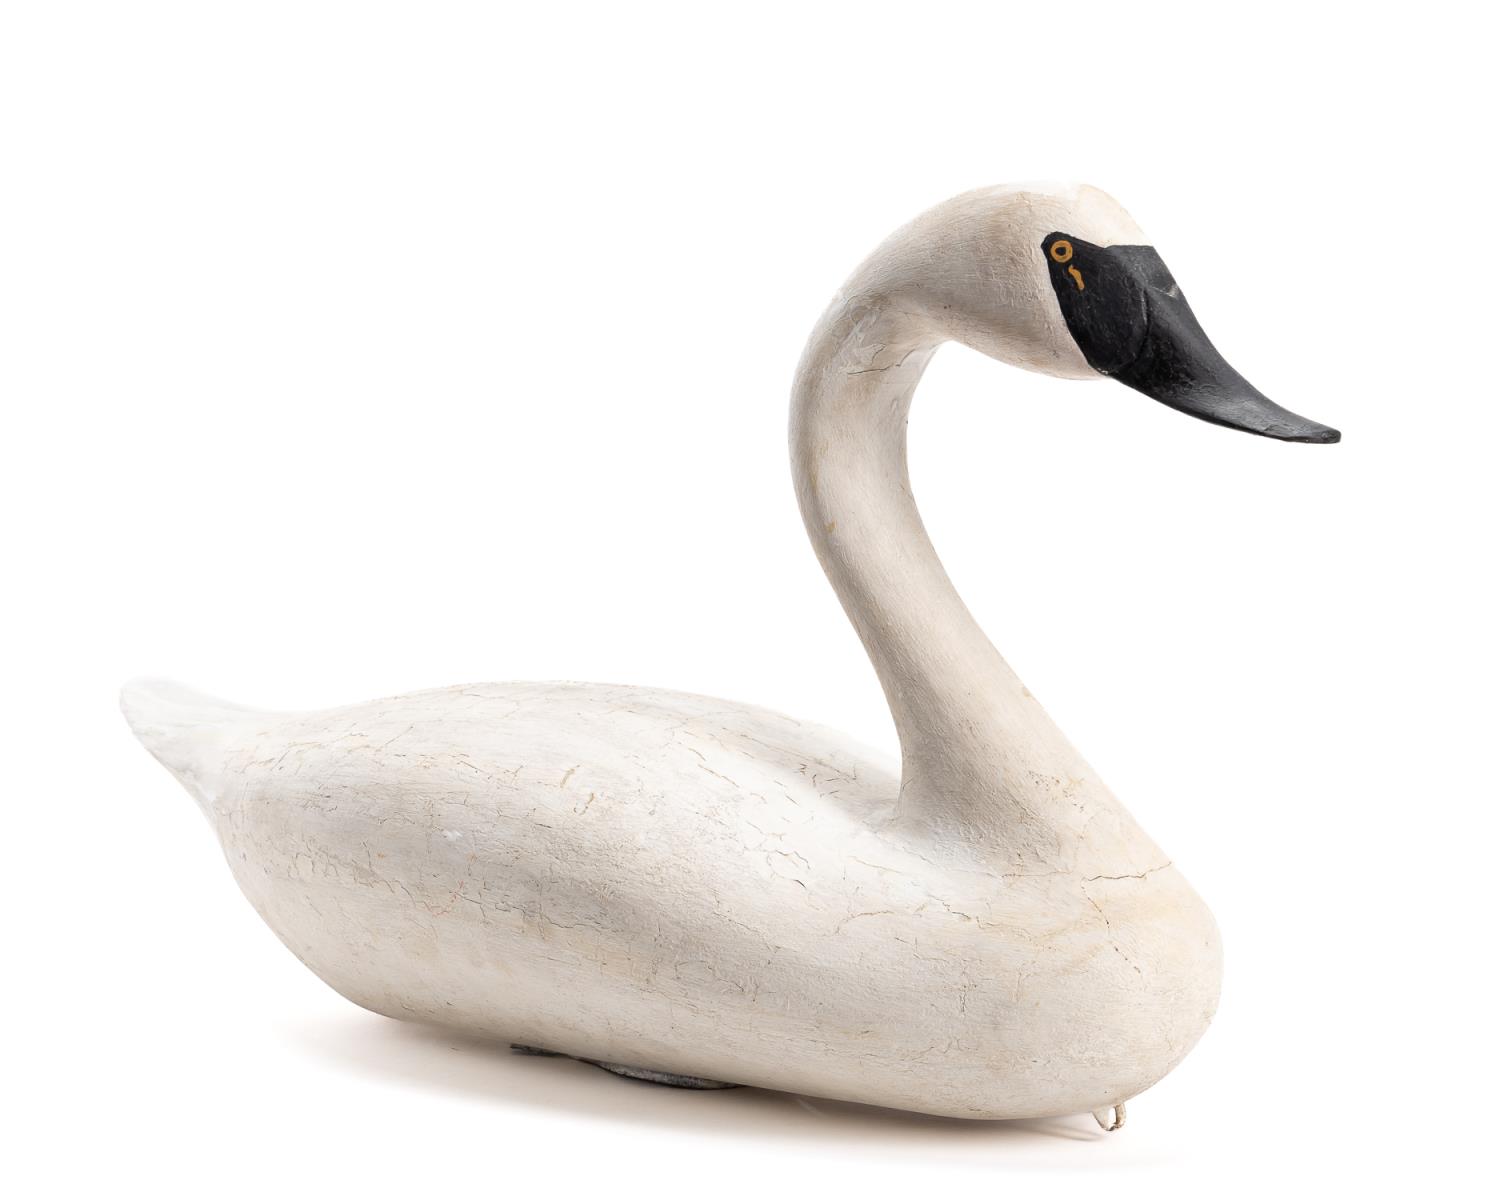 19TH C. LIFE-SIZE TRUMPETER SWAN